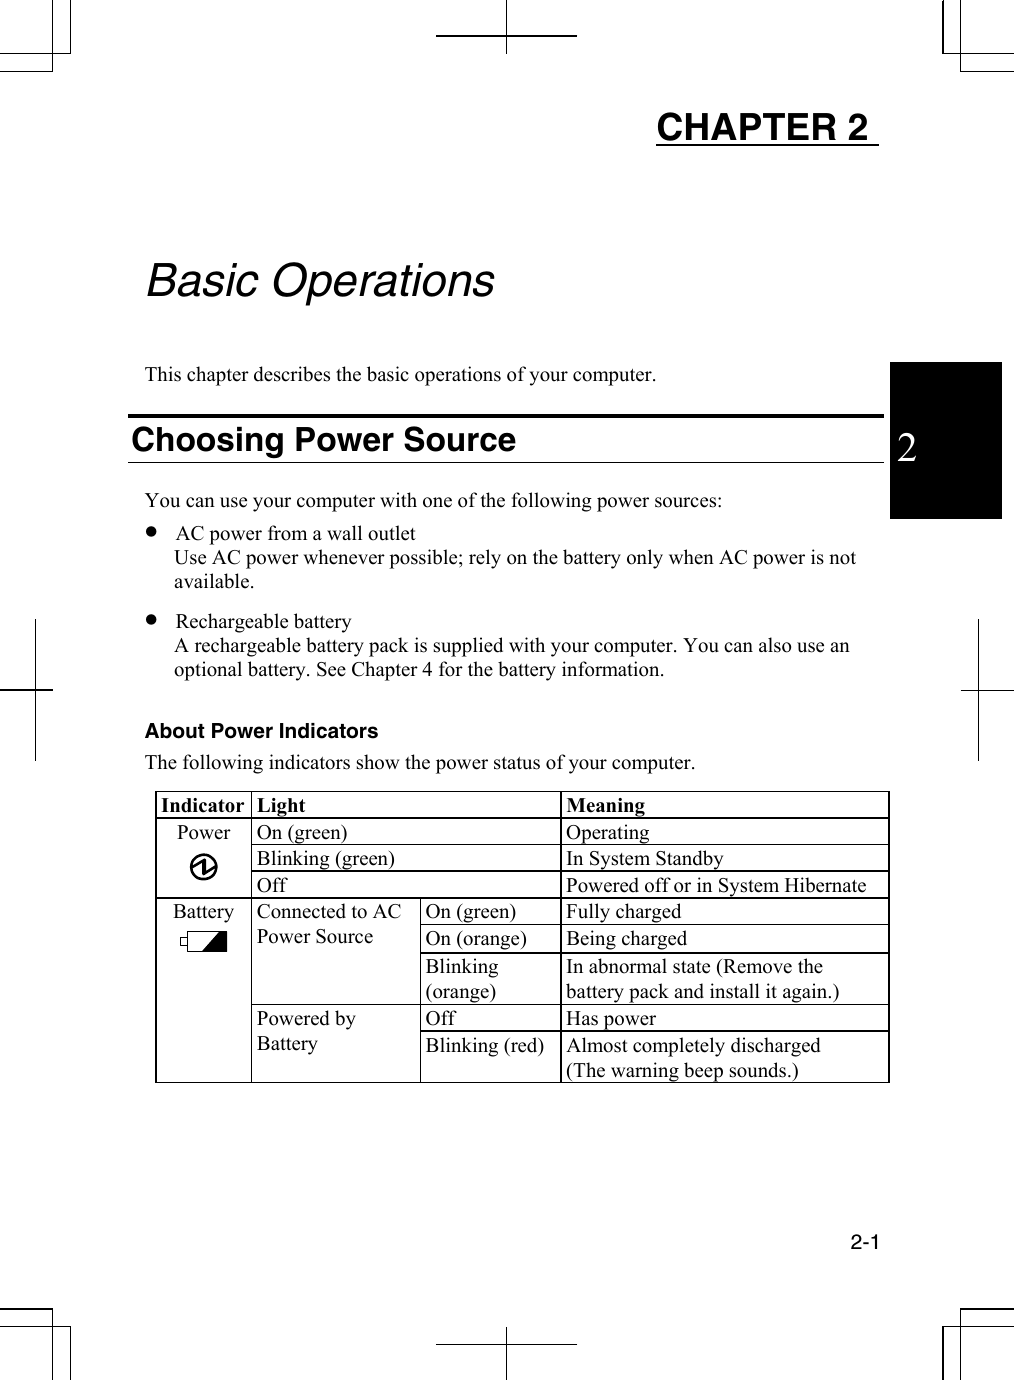  2-1  2 CHAPTER 2     Basic Operations  This chapter describes the basic operations of your computer.  Choosing Power Source  You can use your computer with one of the following power sources: •  AC power from a wall outlet Use AC power whenever possible; rely on the battery only when AC power is not available. •  Rechargeable battery  A rechargeable battery pack is supplied with your computer. You can also use an optional battery. See Chapter 4 for the battery information.   About Power Indicators The following indicators show the power status of your computer.  Indicator Light  Meaning On (green)  Operating Blinking (green)  In System Standby Power  Off  Powered off or in System Hibernate On (green)  Fully charged On (orange)  Being charged Connected to AC Power Source Blinking (orange) In abnormal state (Remove the battery pack and install it again.) Off   Has power  Battery    Powered by Battery  Blinking (red)  Almost completely discharged (The warning beep sounds.)  